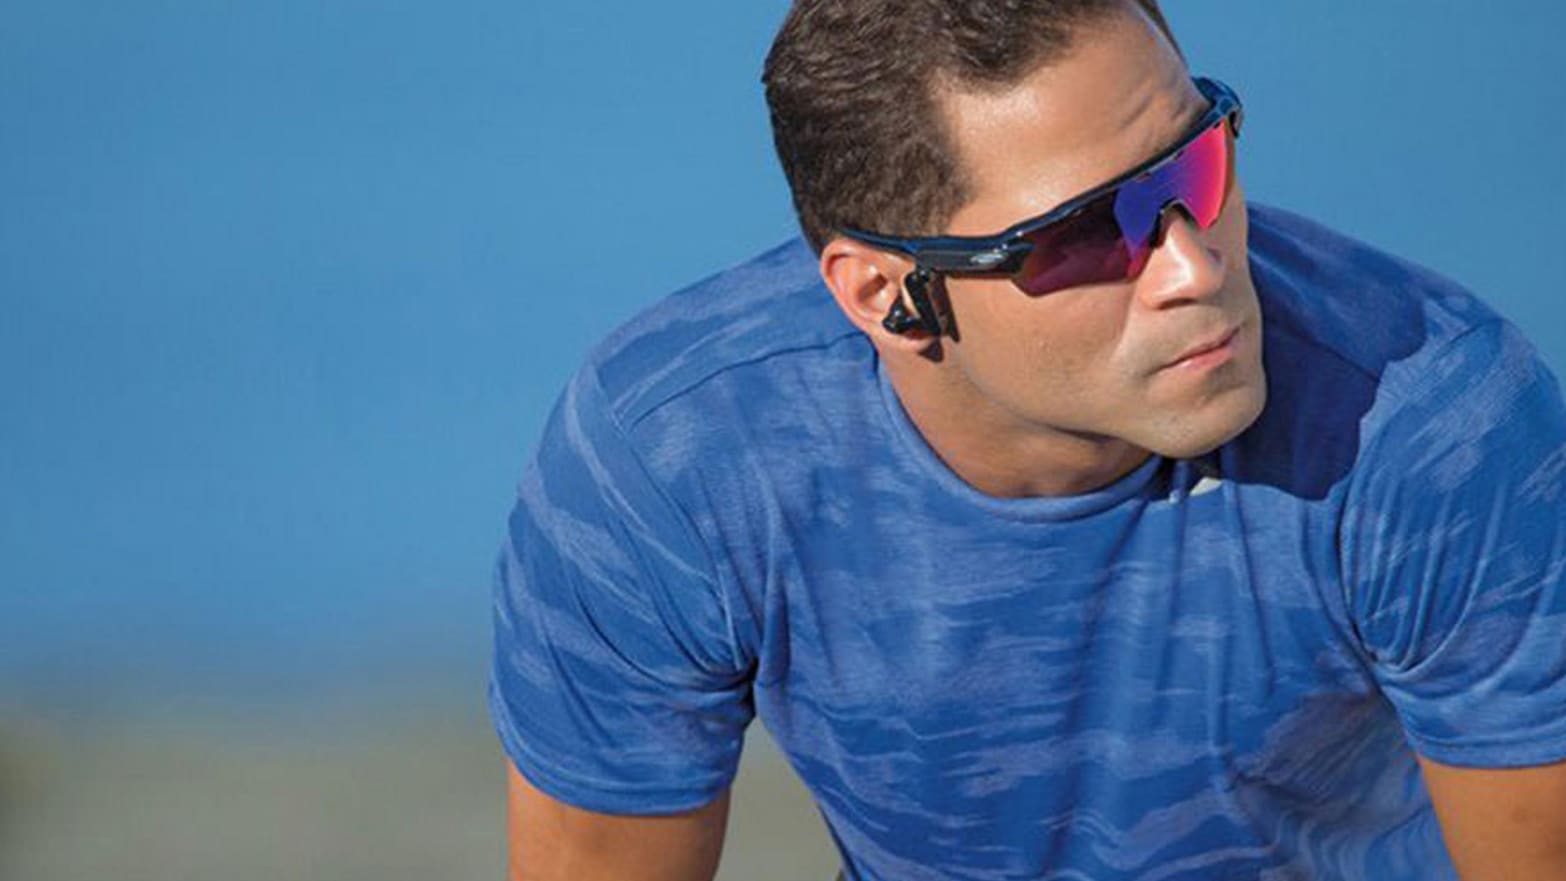 Oakley's Smart Sunglasses Track Your Performance and Help You Train Harder